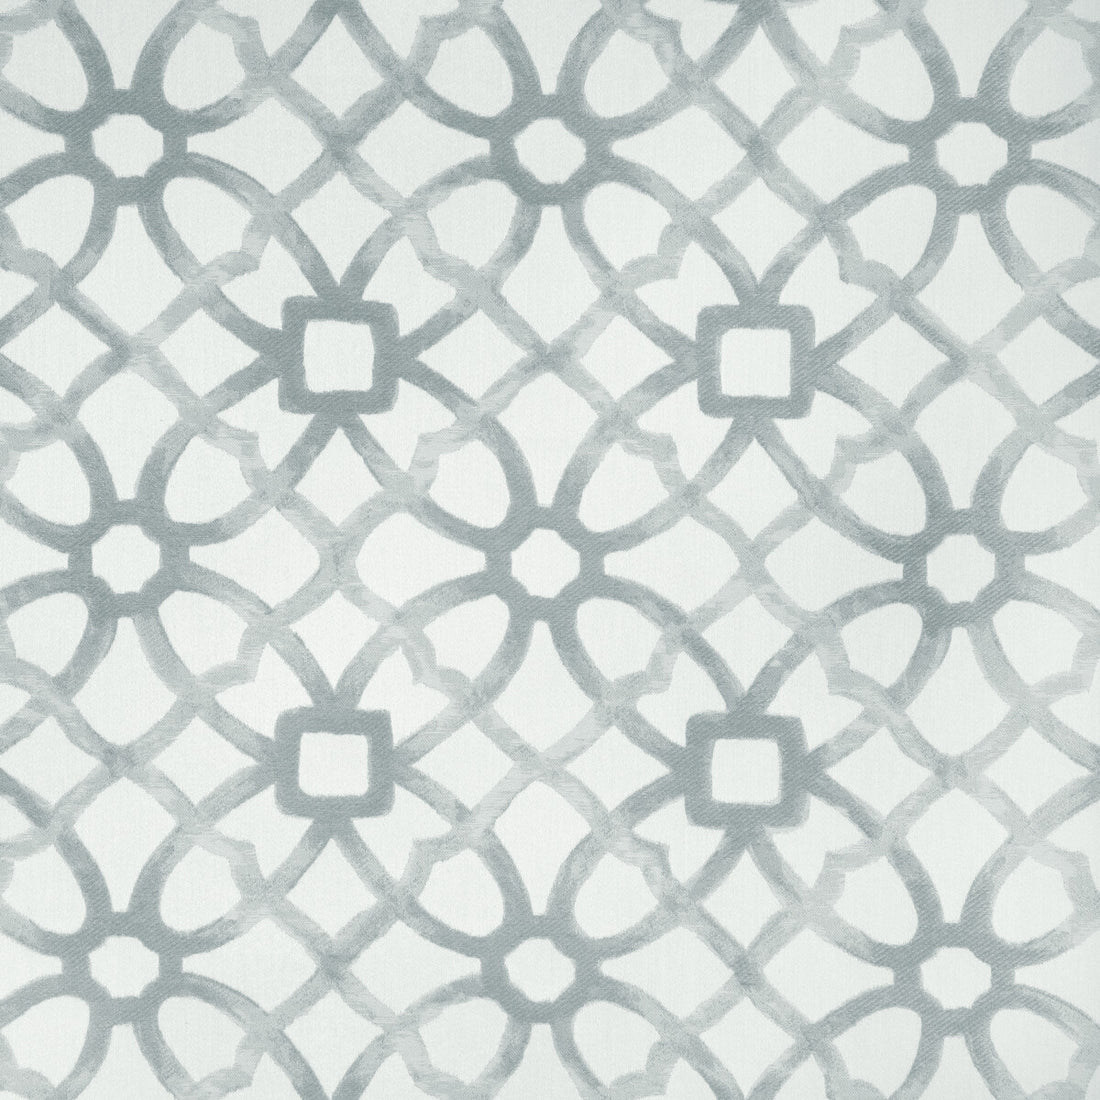 New Zuma fabric in spa color - pattern 36788.52.0 - by Kravet Design in the Candice Olson collection